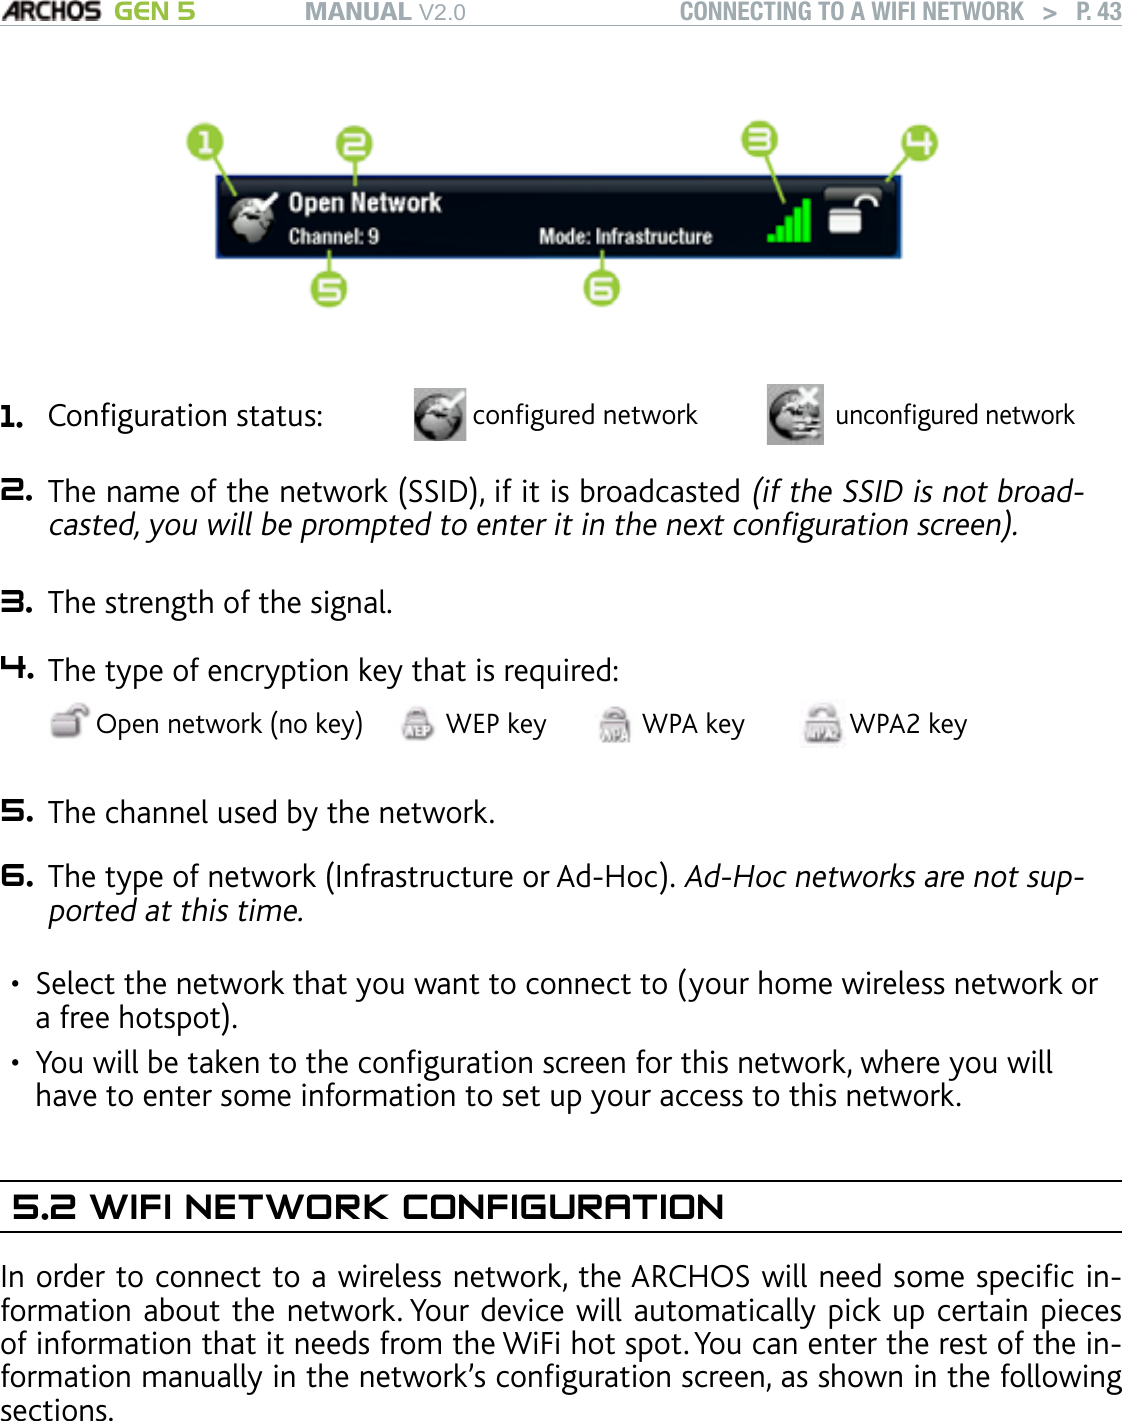 MANUAL V2.0 GEN 5 CONNECTING TO A WIFI NETWORK   &gt;   P. 431. Conguration status: congured networkuncongured network2. The name of the network (SSID), if it is broadcasted (if the SSID is not broad-casted, you will be prompted to enter it in the next conguration screen).3. The strength of the signal.4. The type of encryption key that is required:Open network (no key) WEP key WPA key WPA2 key 5. The channel used by the network.6. The type of network (Infrastructure or Ad-Hoc). Ad-Hoc networks are not sup-ported at this time.Select the network that you want to connect to (your home wireless network or a free hotspot).You will be taken to the conguration screen for this network, where you will have to enter some information to set up your access to this network.5.2 WIFI NETWORK CONFIGURATIONIn order to connect to a wireless network, the ARCHOS will need some specic in-formation about the network. Your device will automatically pick up certain pieces of information that it needs from the WiFi hot spot. You can enter the rest of the in-formation manually in the network’s conguration screen, as shown in the following sections.Note that your device will remember the network connection information that you enter, in order to re-use it and connect automatically to the network when it is in range.••